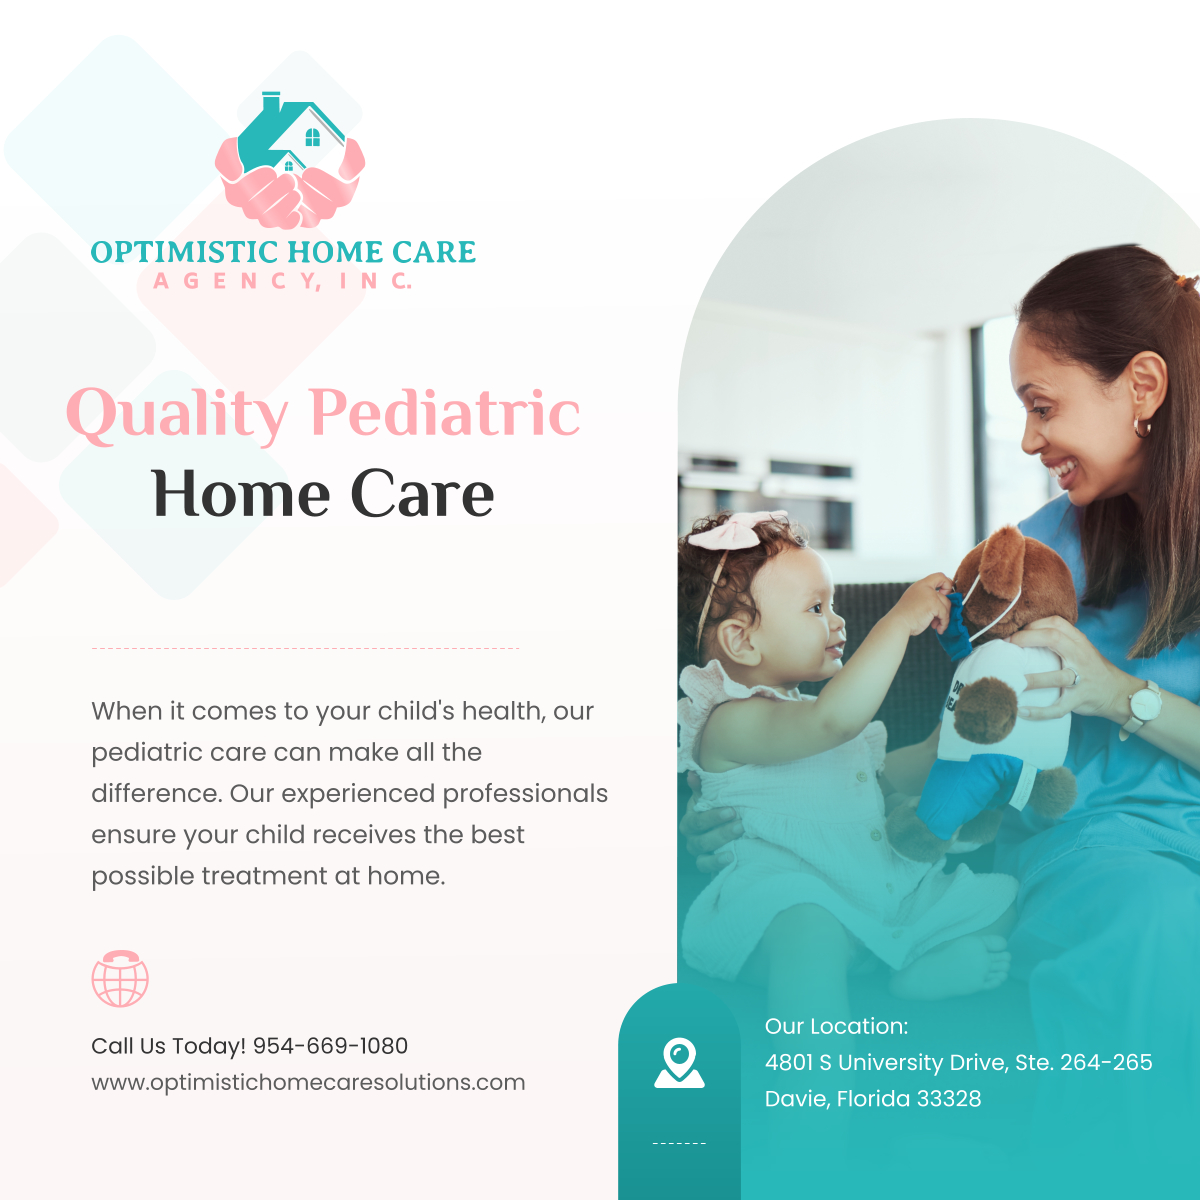 We understand that your child's well-being is your top priority. Trust us to deliver quality pediatric home care that brings peace of mind to your family.

#PediatricHomeCare #QualityCare #DavieFL #HomeCare #HomeHealthcare